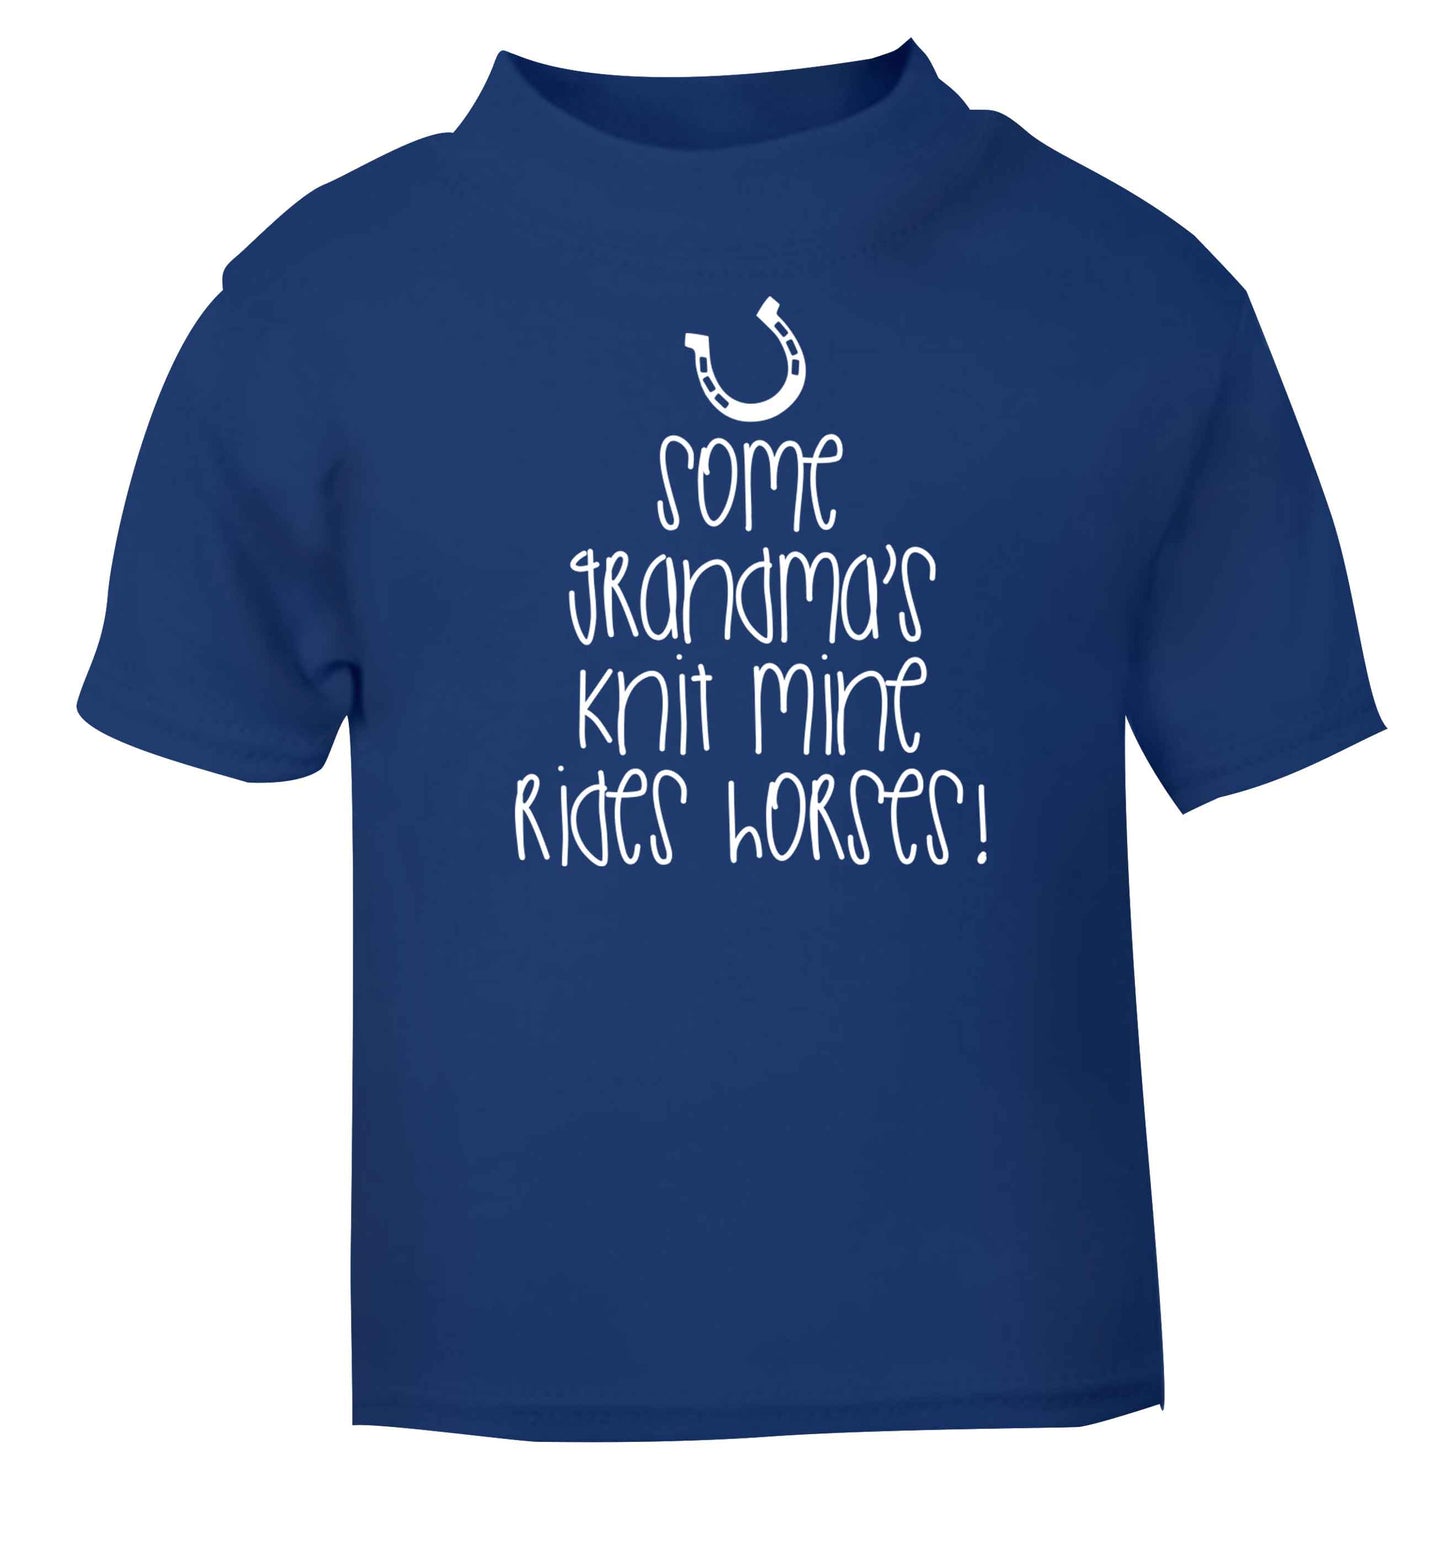 Some grandma's knit mine rides horses blue baby toddler Tshirt 2 Years